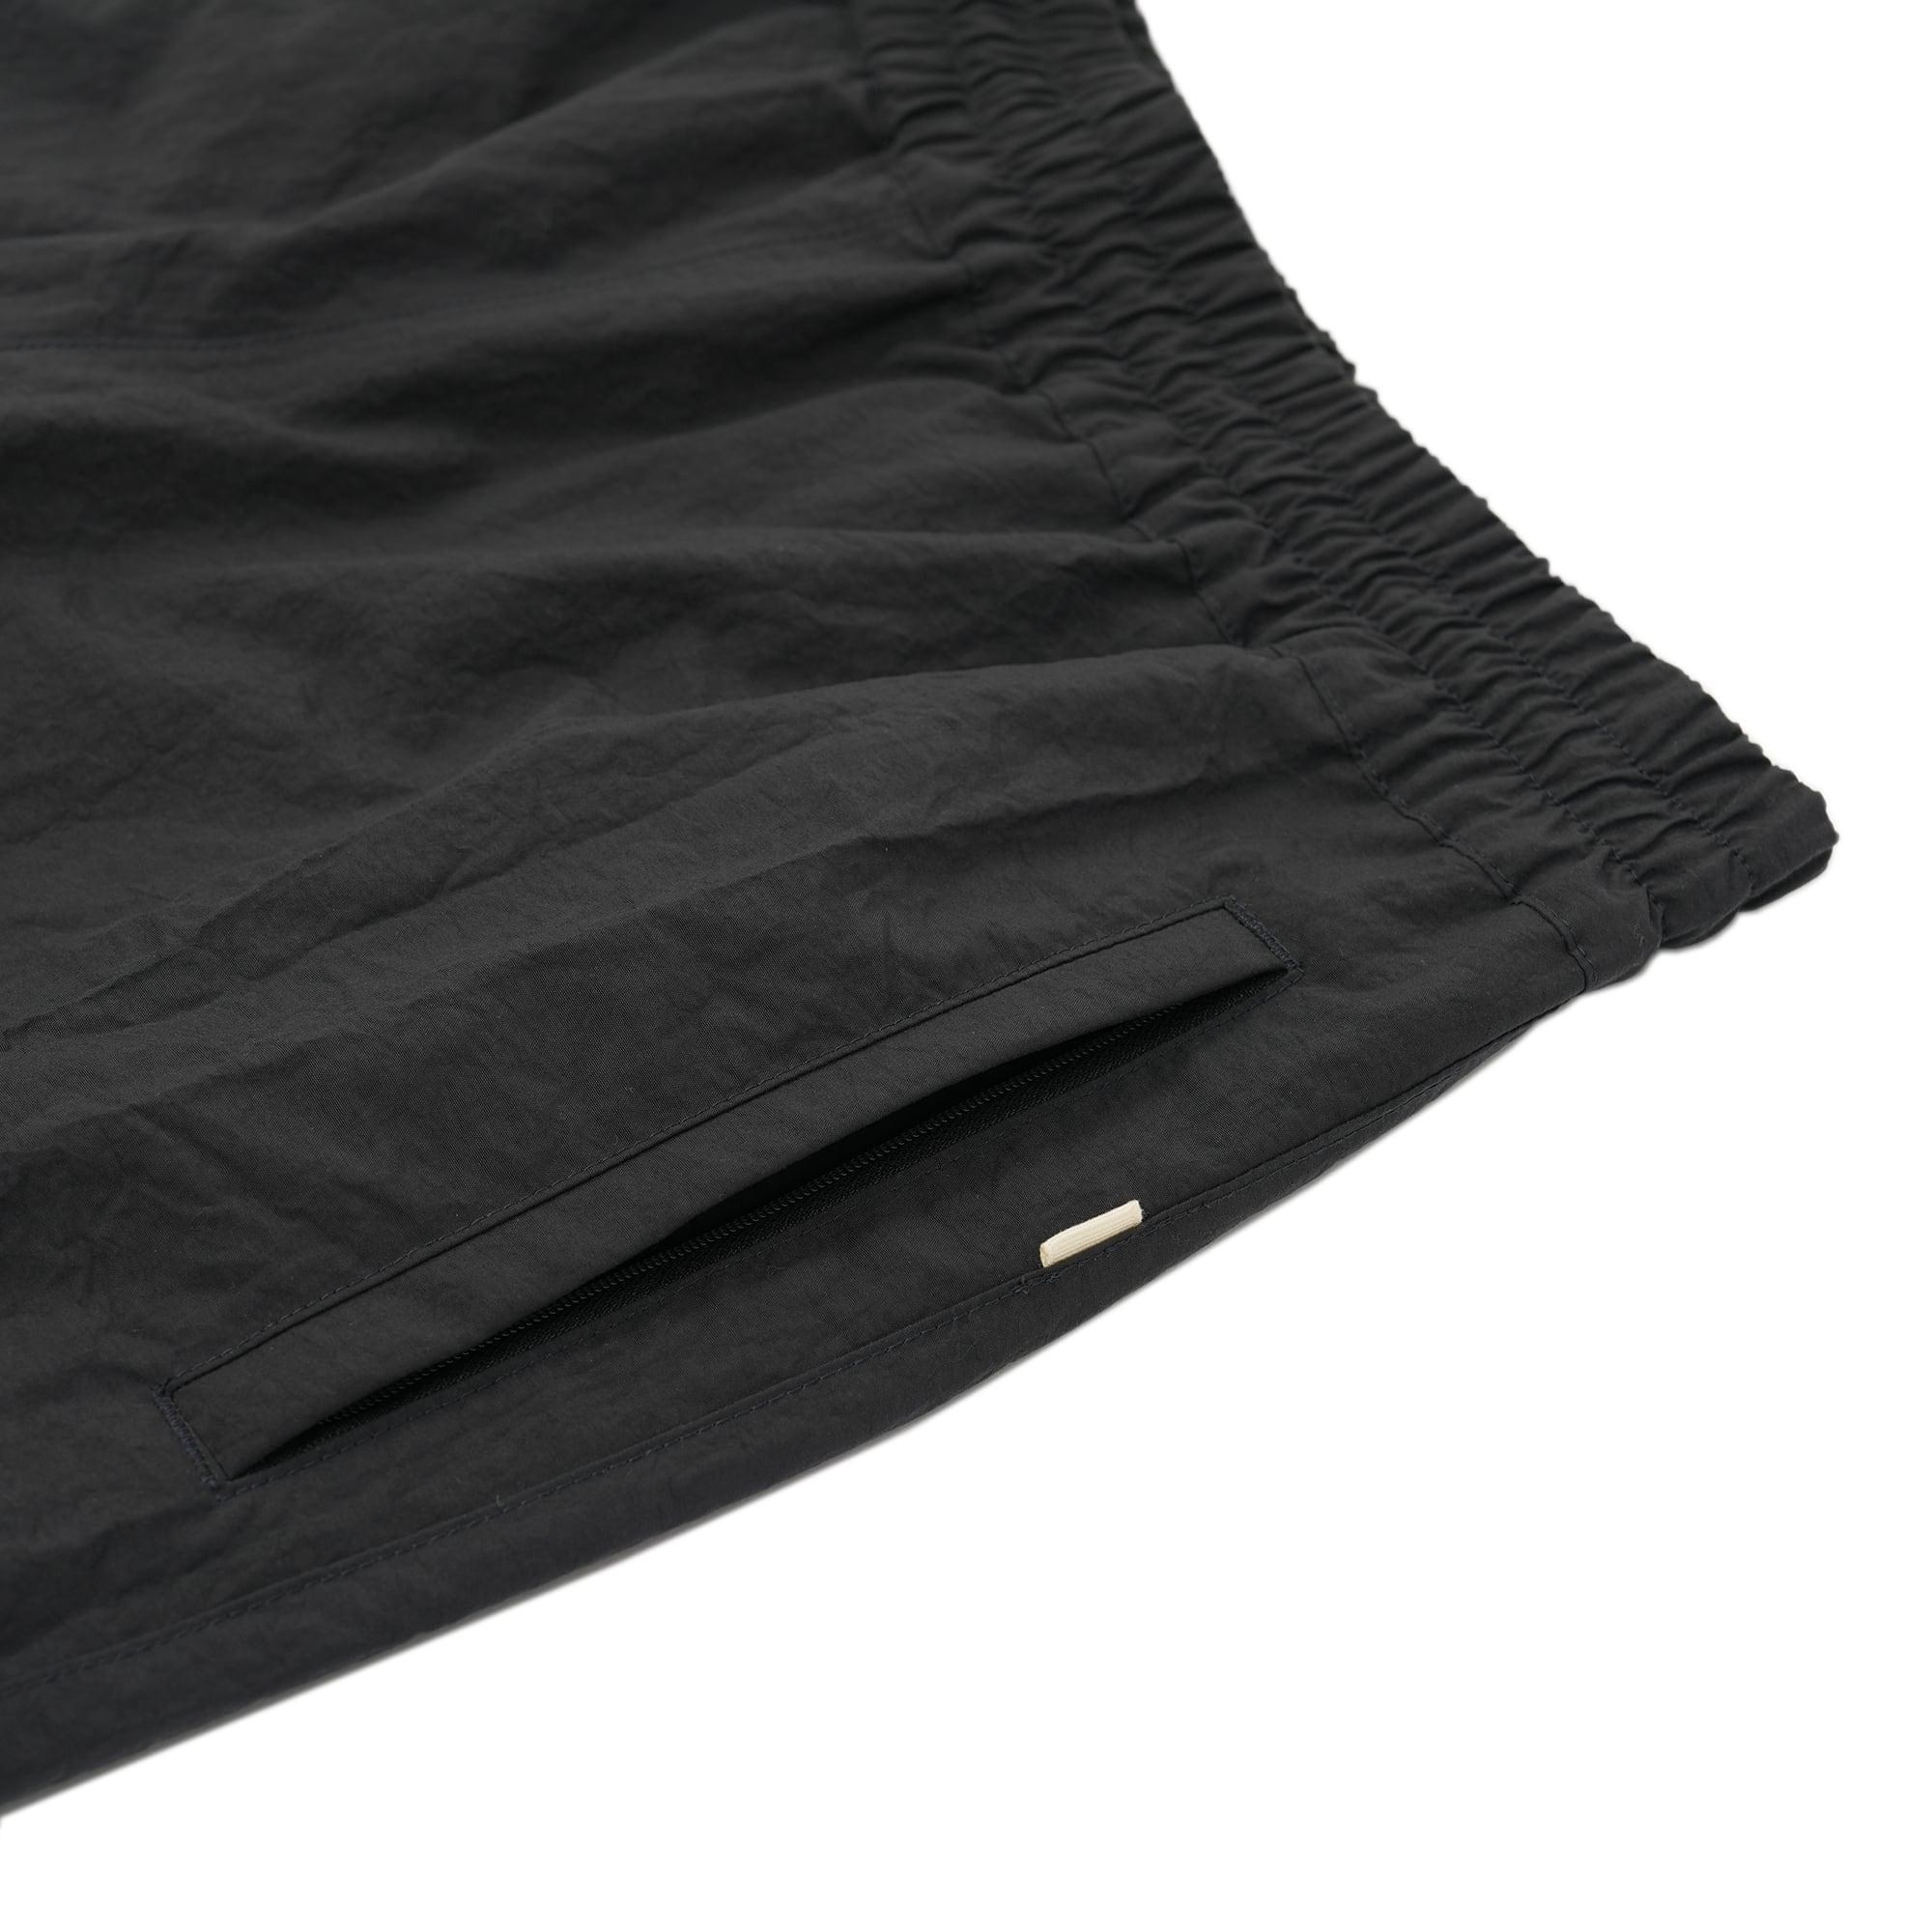 OVY Recycled Nylon Water-repellent Pants